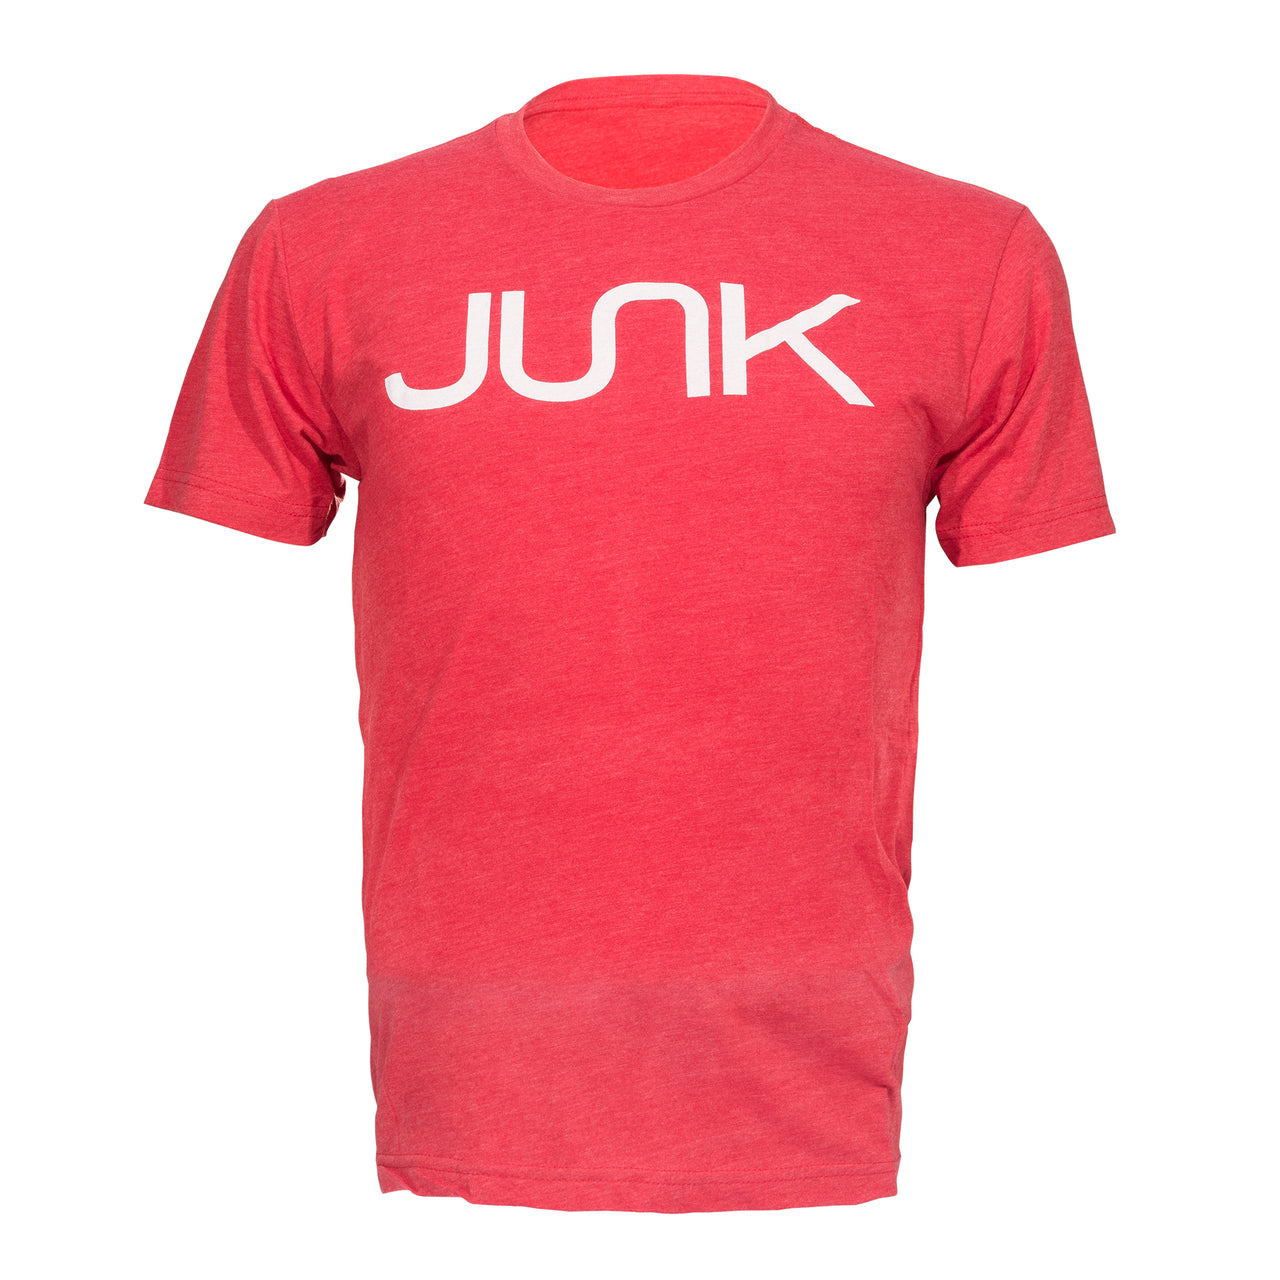 JUNK Tri-Blend Red Tee - View 1